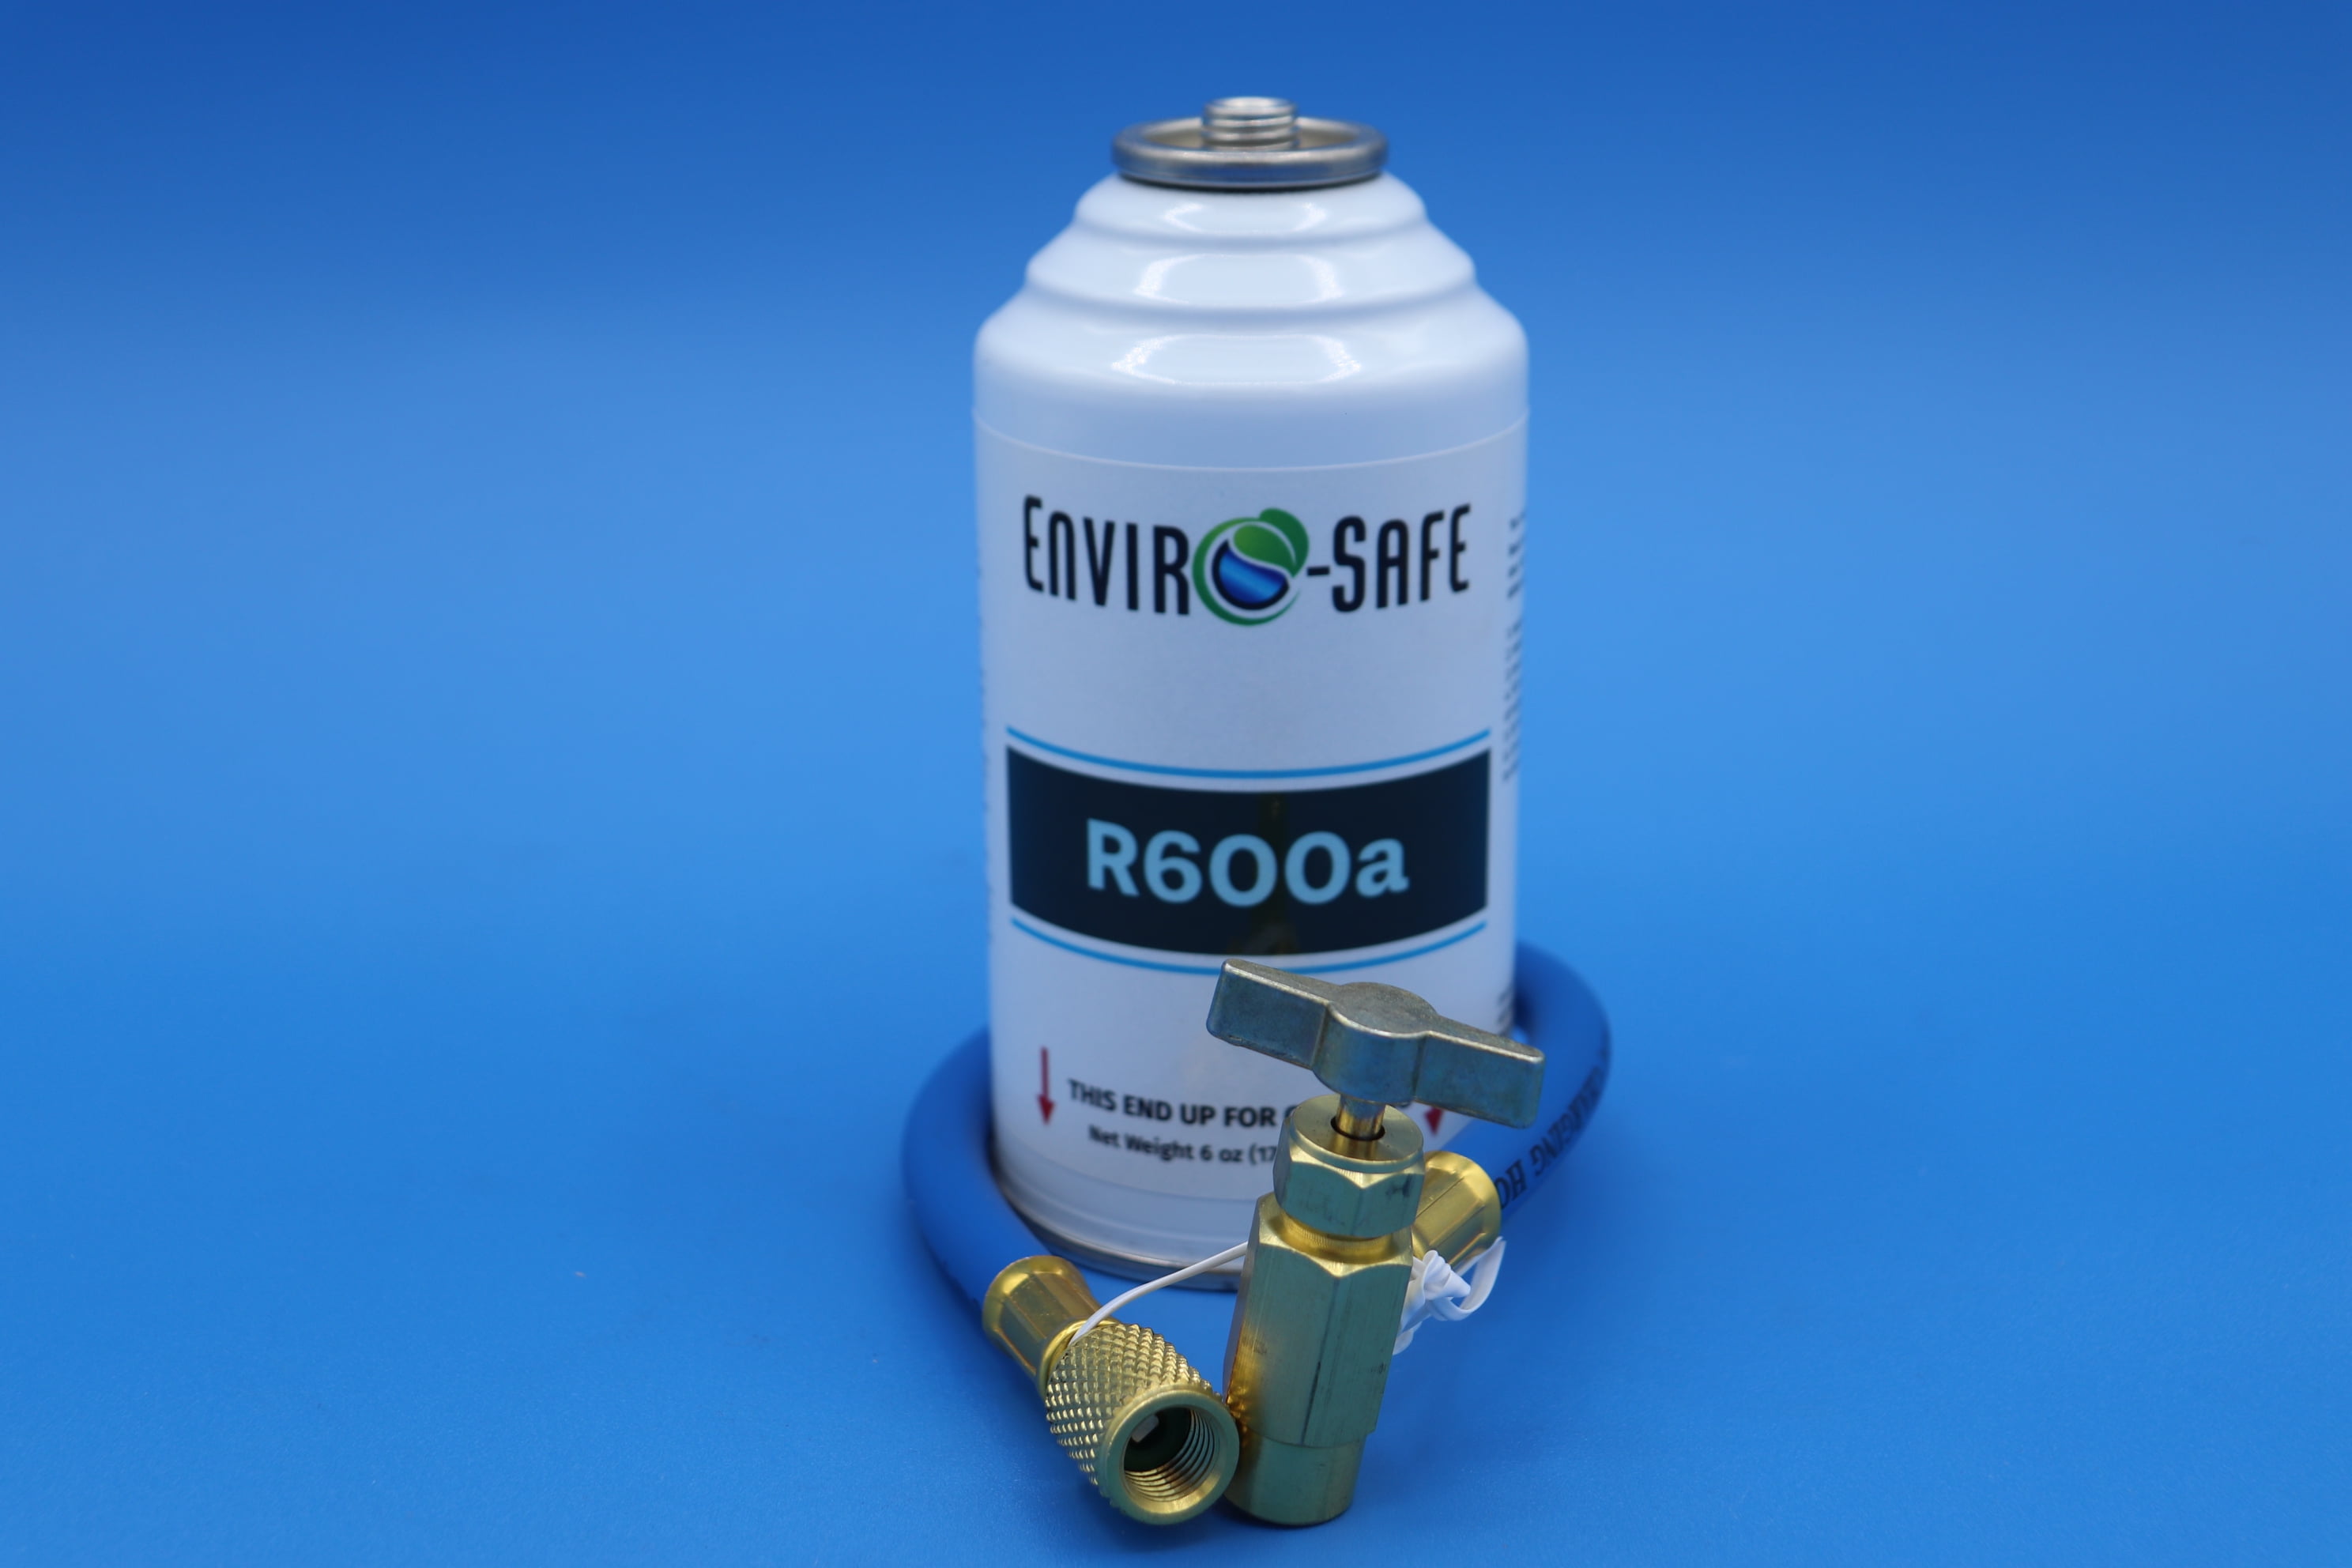 R600a Refrigerant w/ Proseal Mini Inject with or without Dye